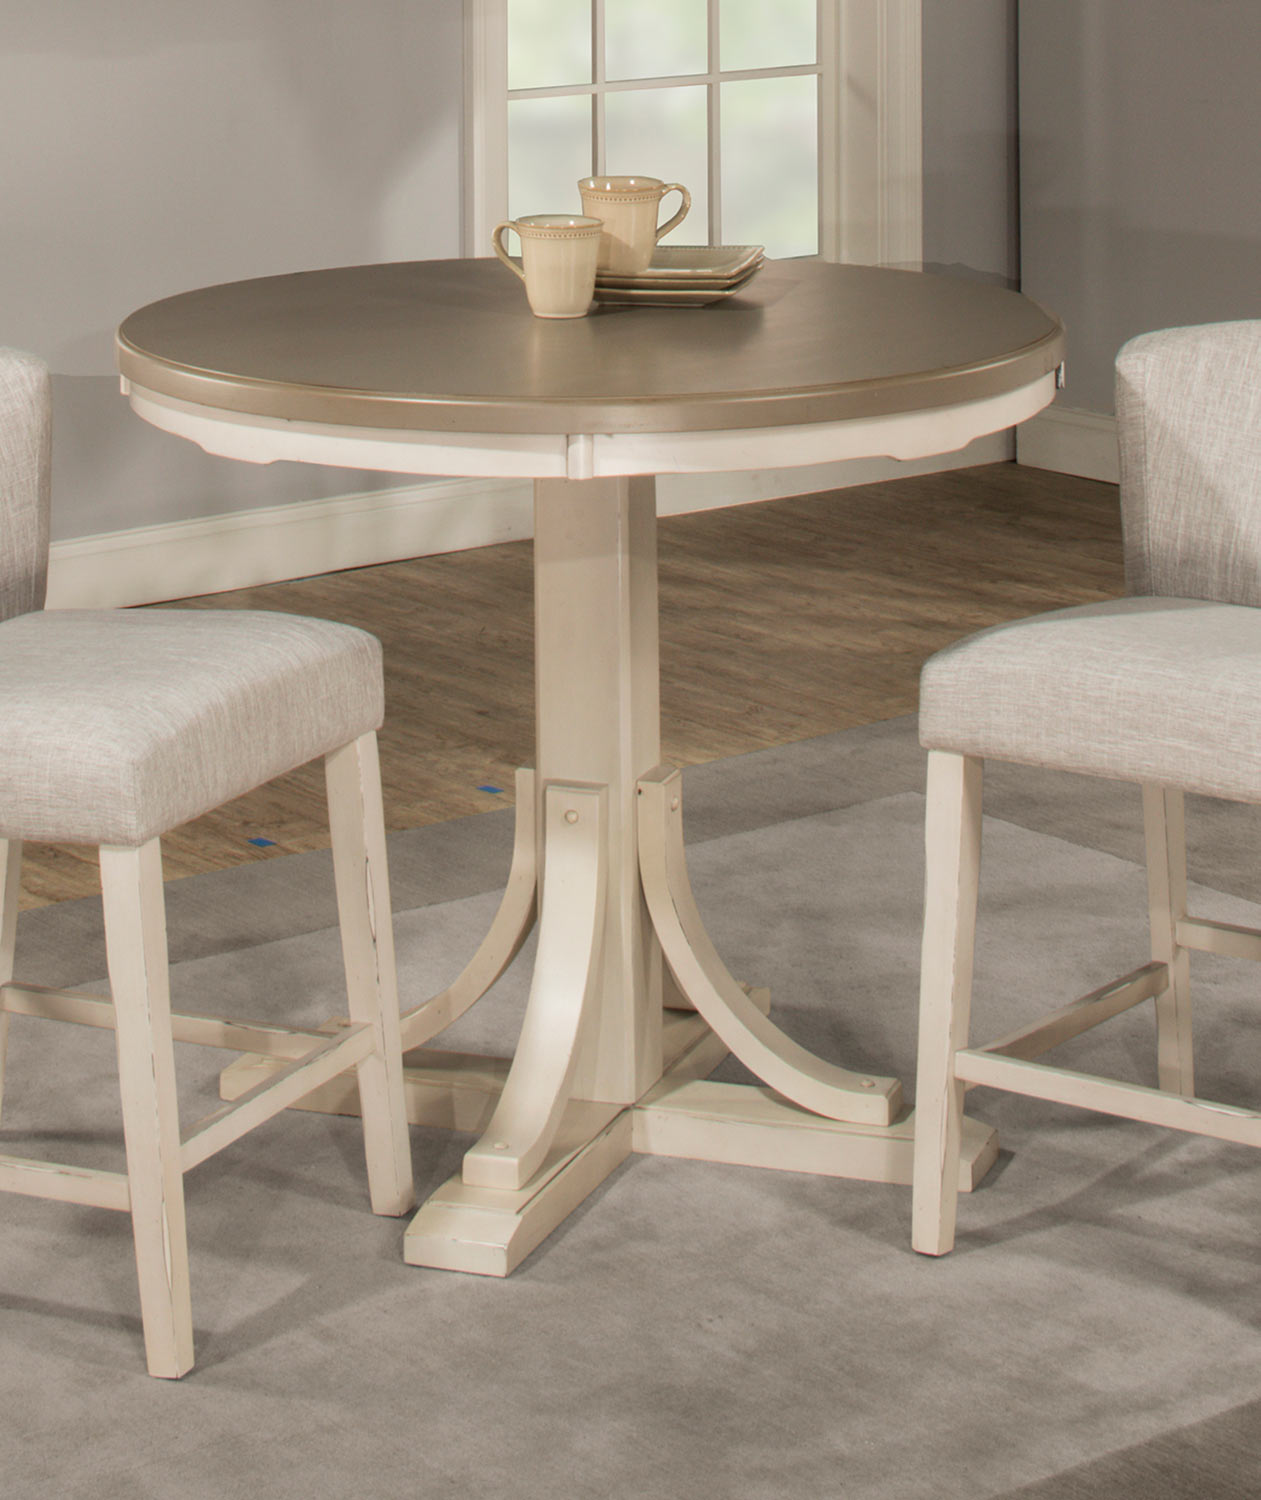 Hillsdale Clarion Round Counter Height Dining Table - Gray/White